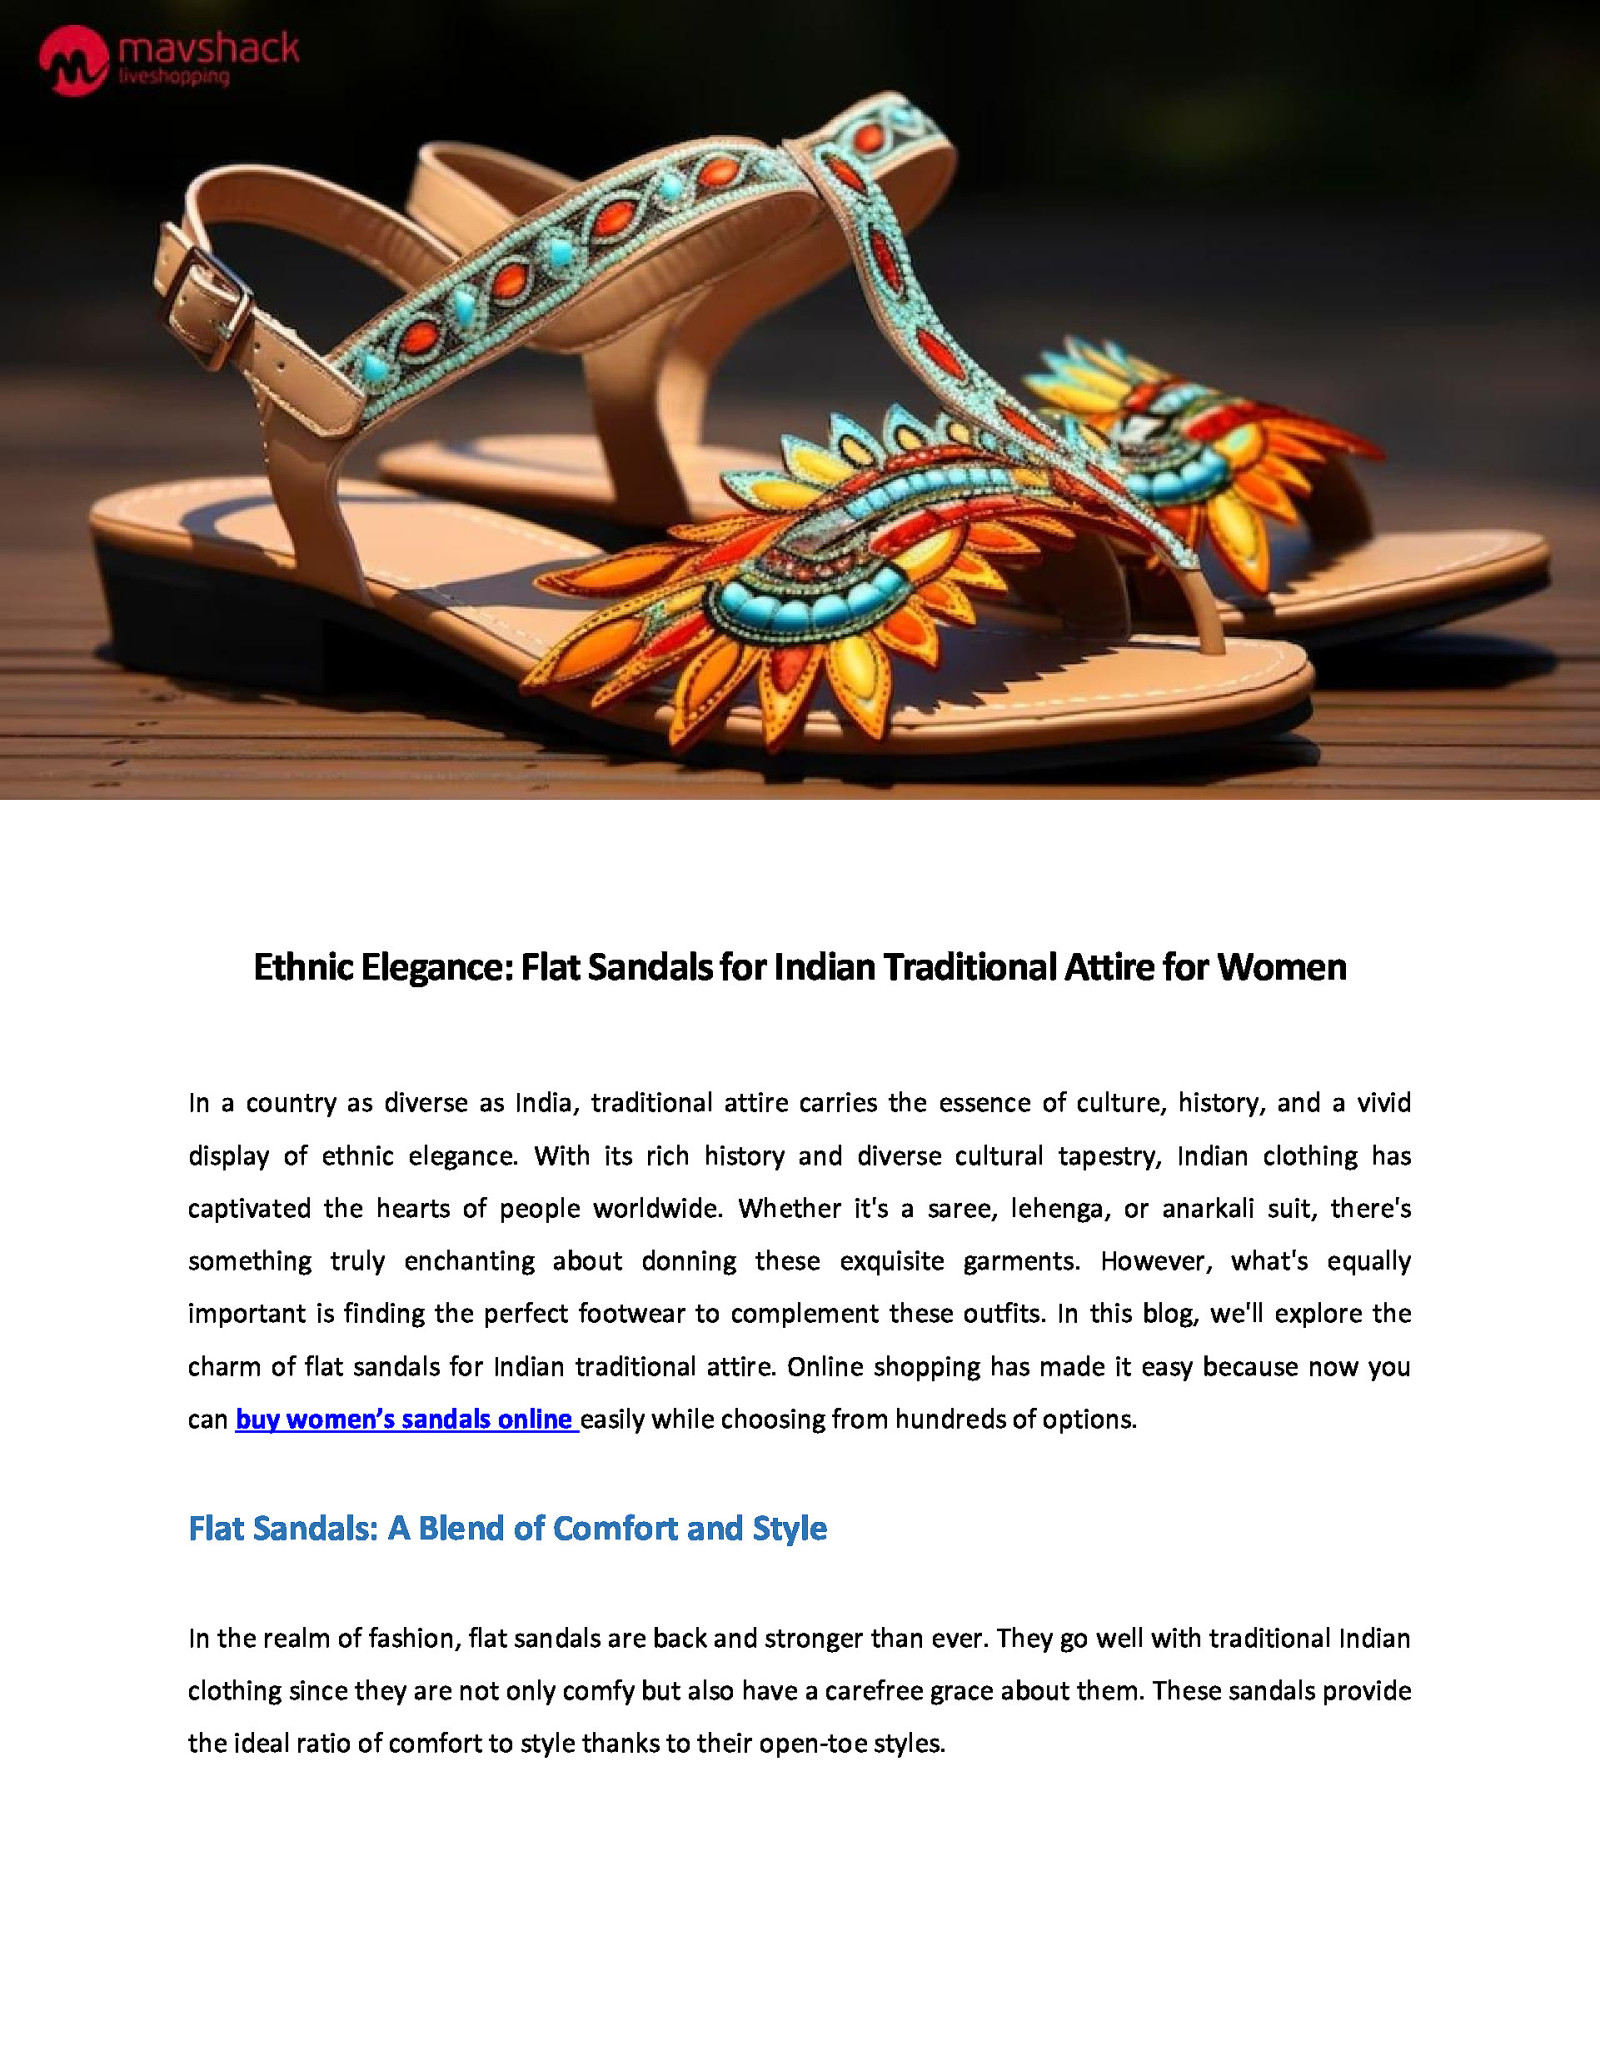 Ethnic Elegance: Flat Sandals for Indian Traditional Attire for Women